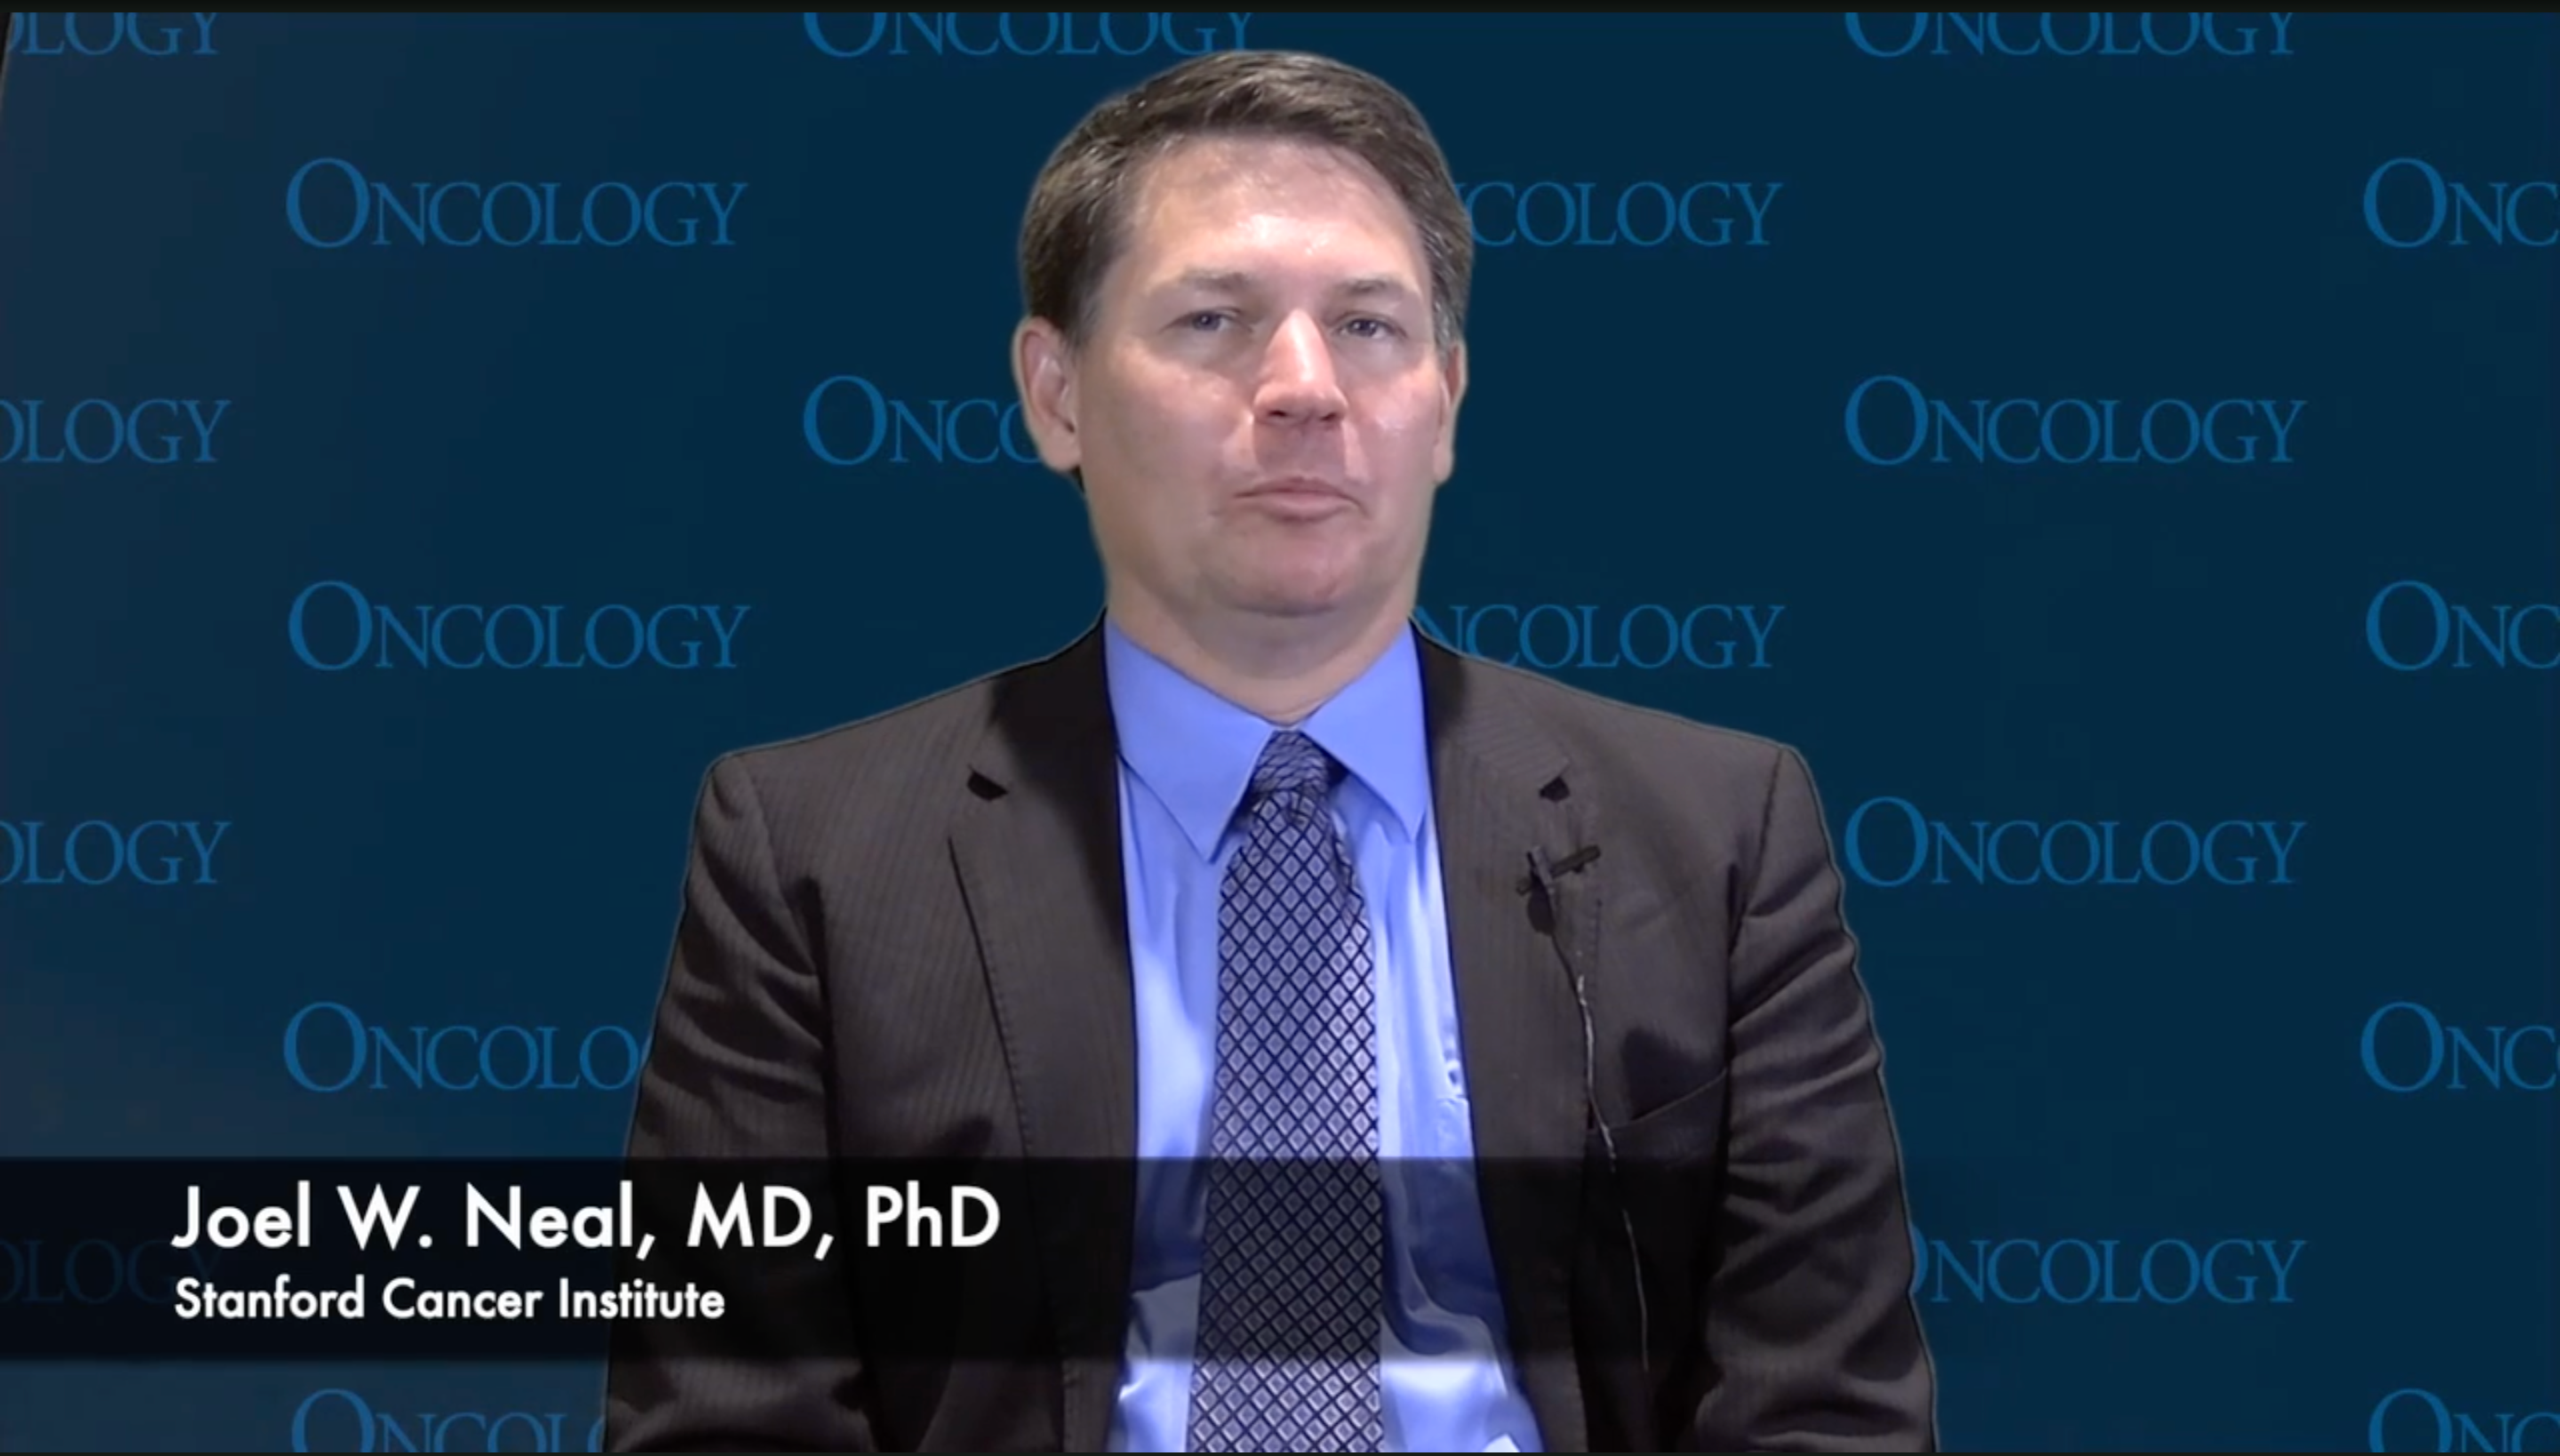 In terms of tumor control, treatment with cabozantinib and atezolizumab led to an overall response rate of 19% among patients with advanced non–small cell lung cancer, according to Joel W. Neal, MD, PhD.